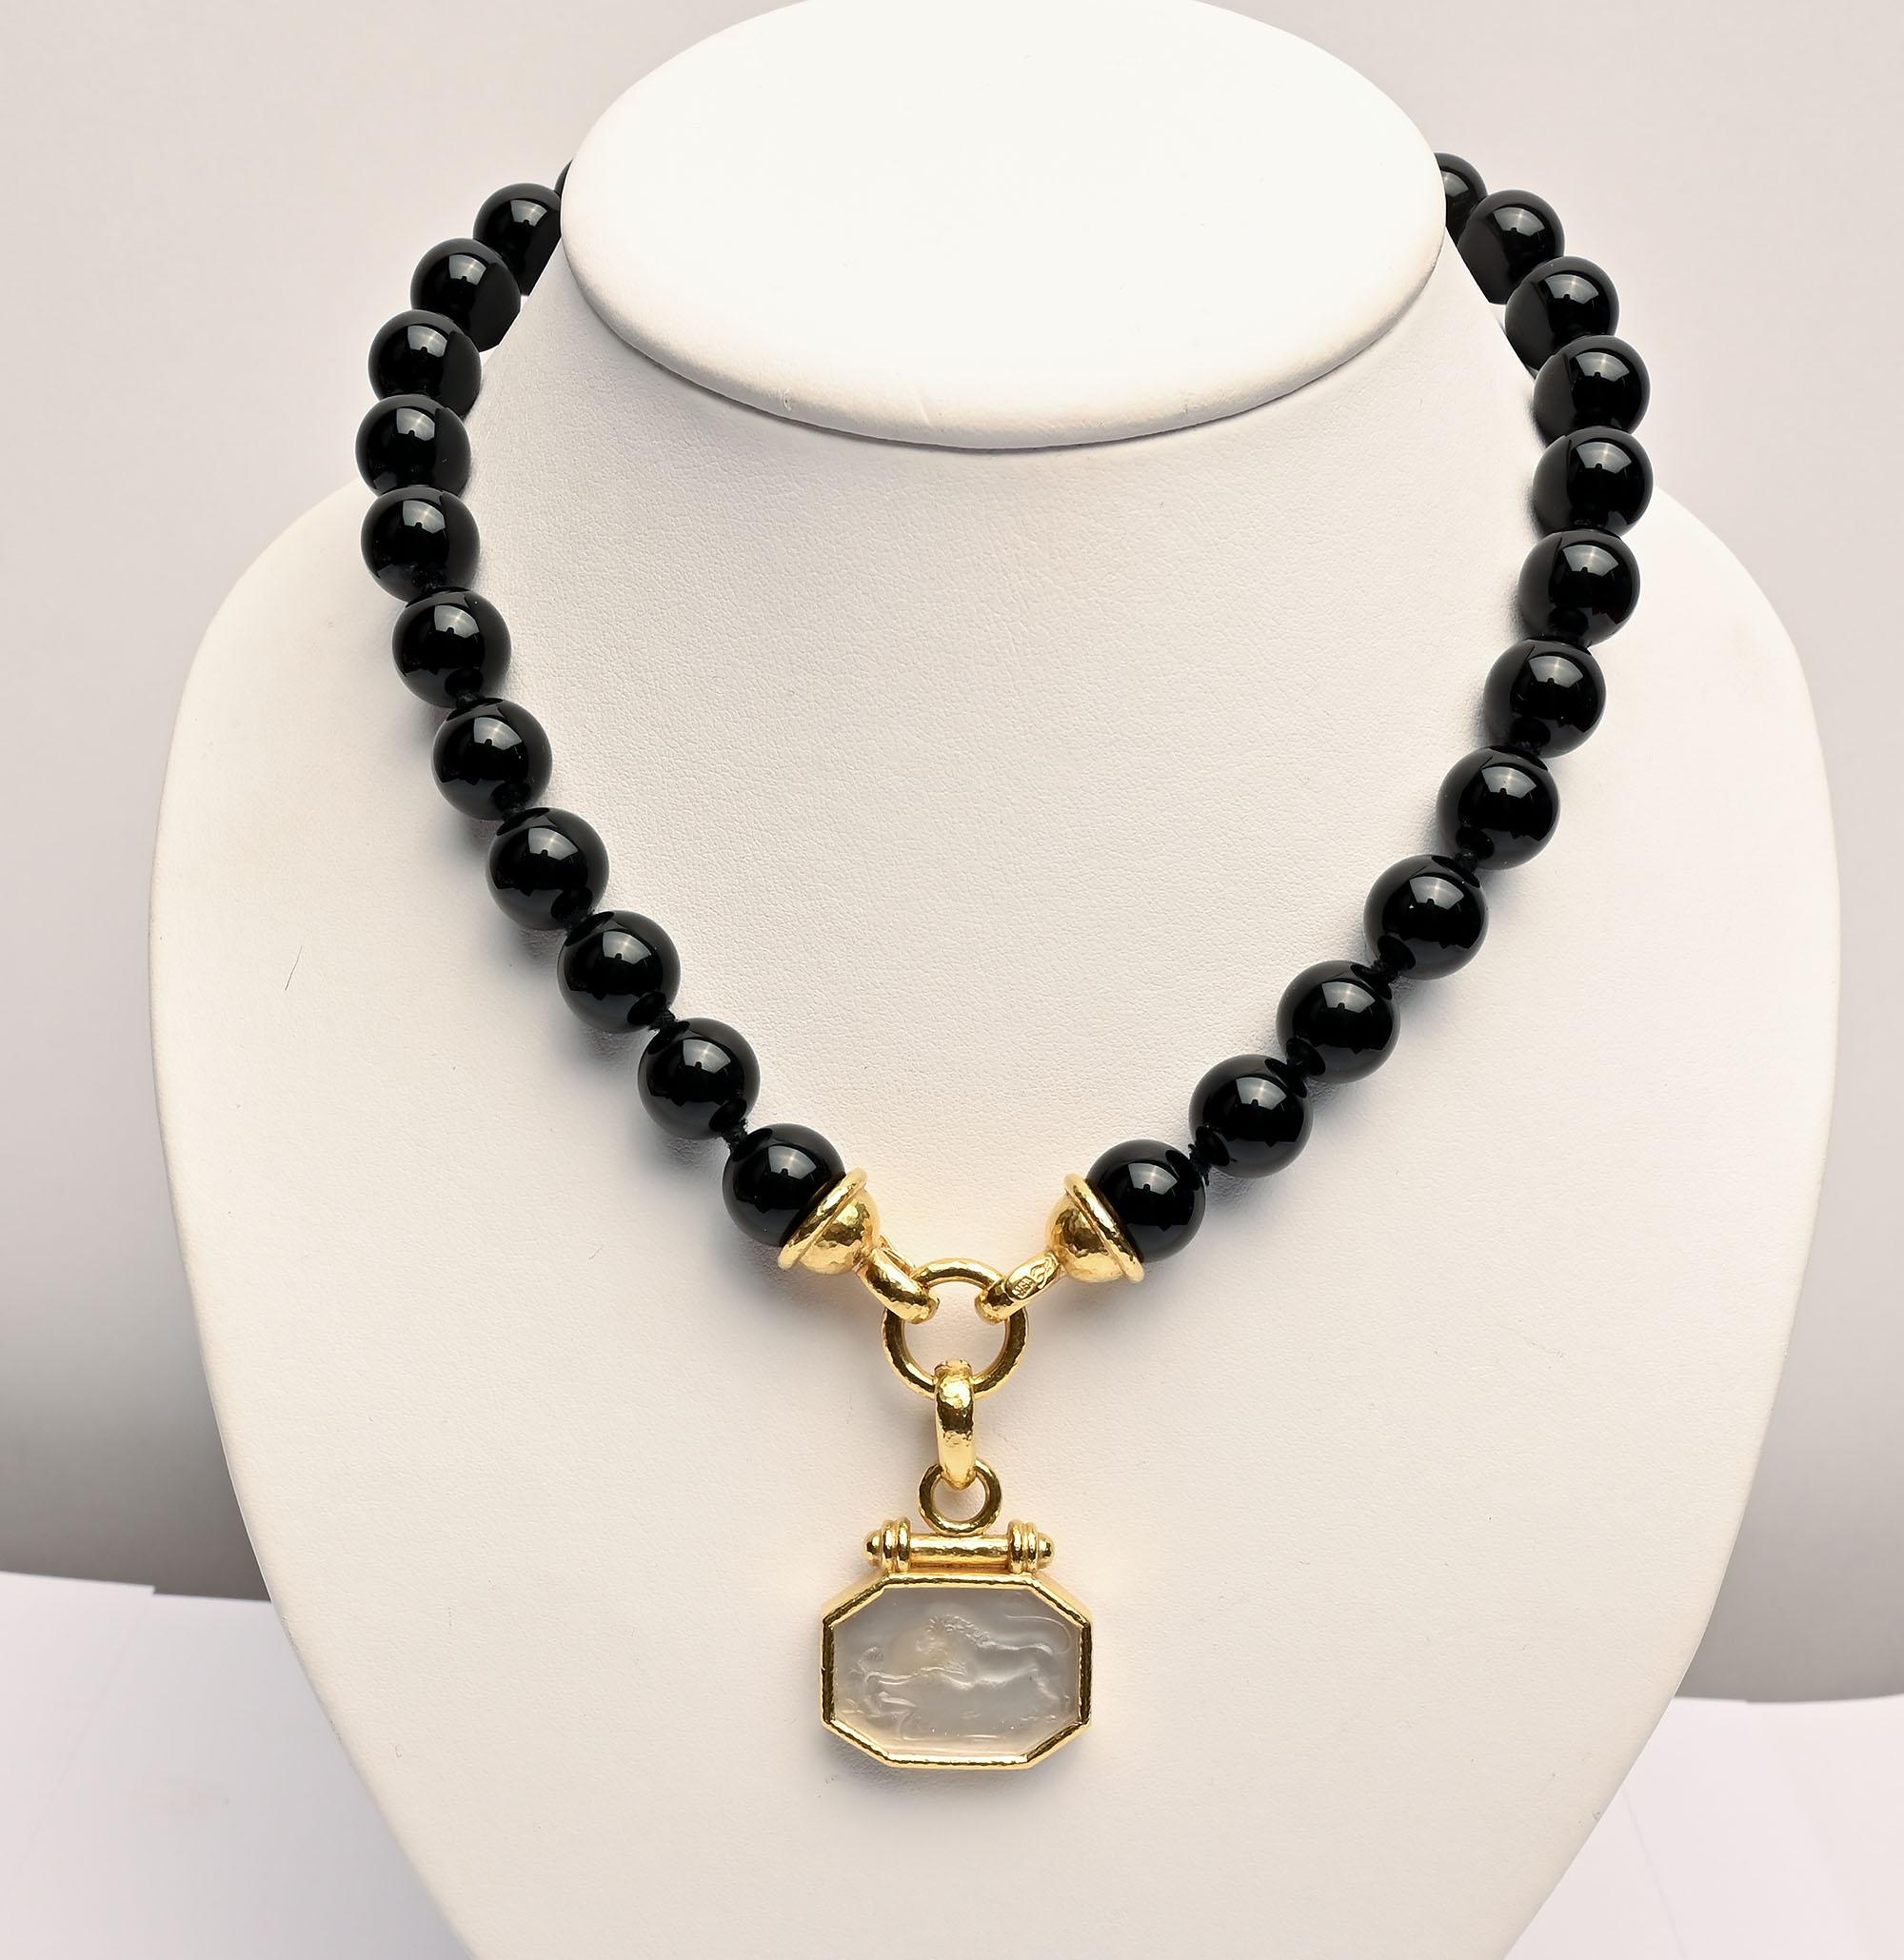 Stunning necklace of round black onyx beads by Elizabeth Locke. The beads are 12 mm in size. The necklace can be worn as a 17 inch single strand of beads or with a pendant attached. It comes with an octagonal shape glass pendant of a seated angel